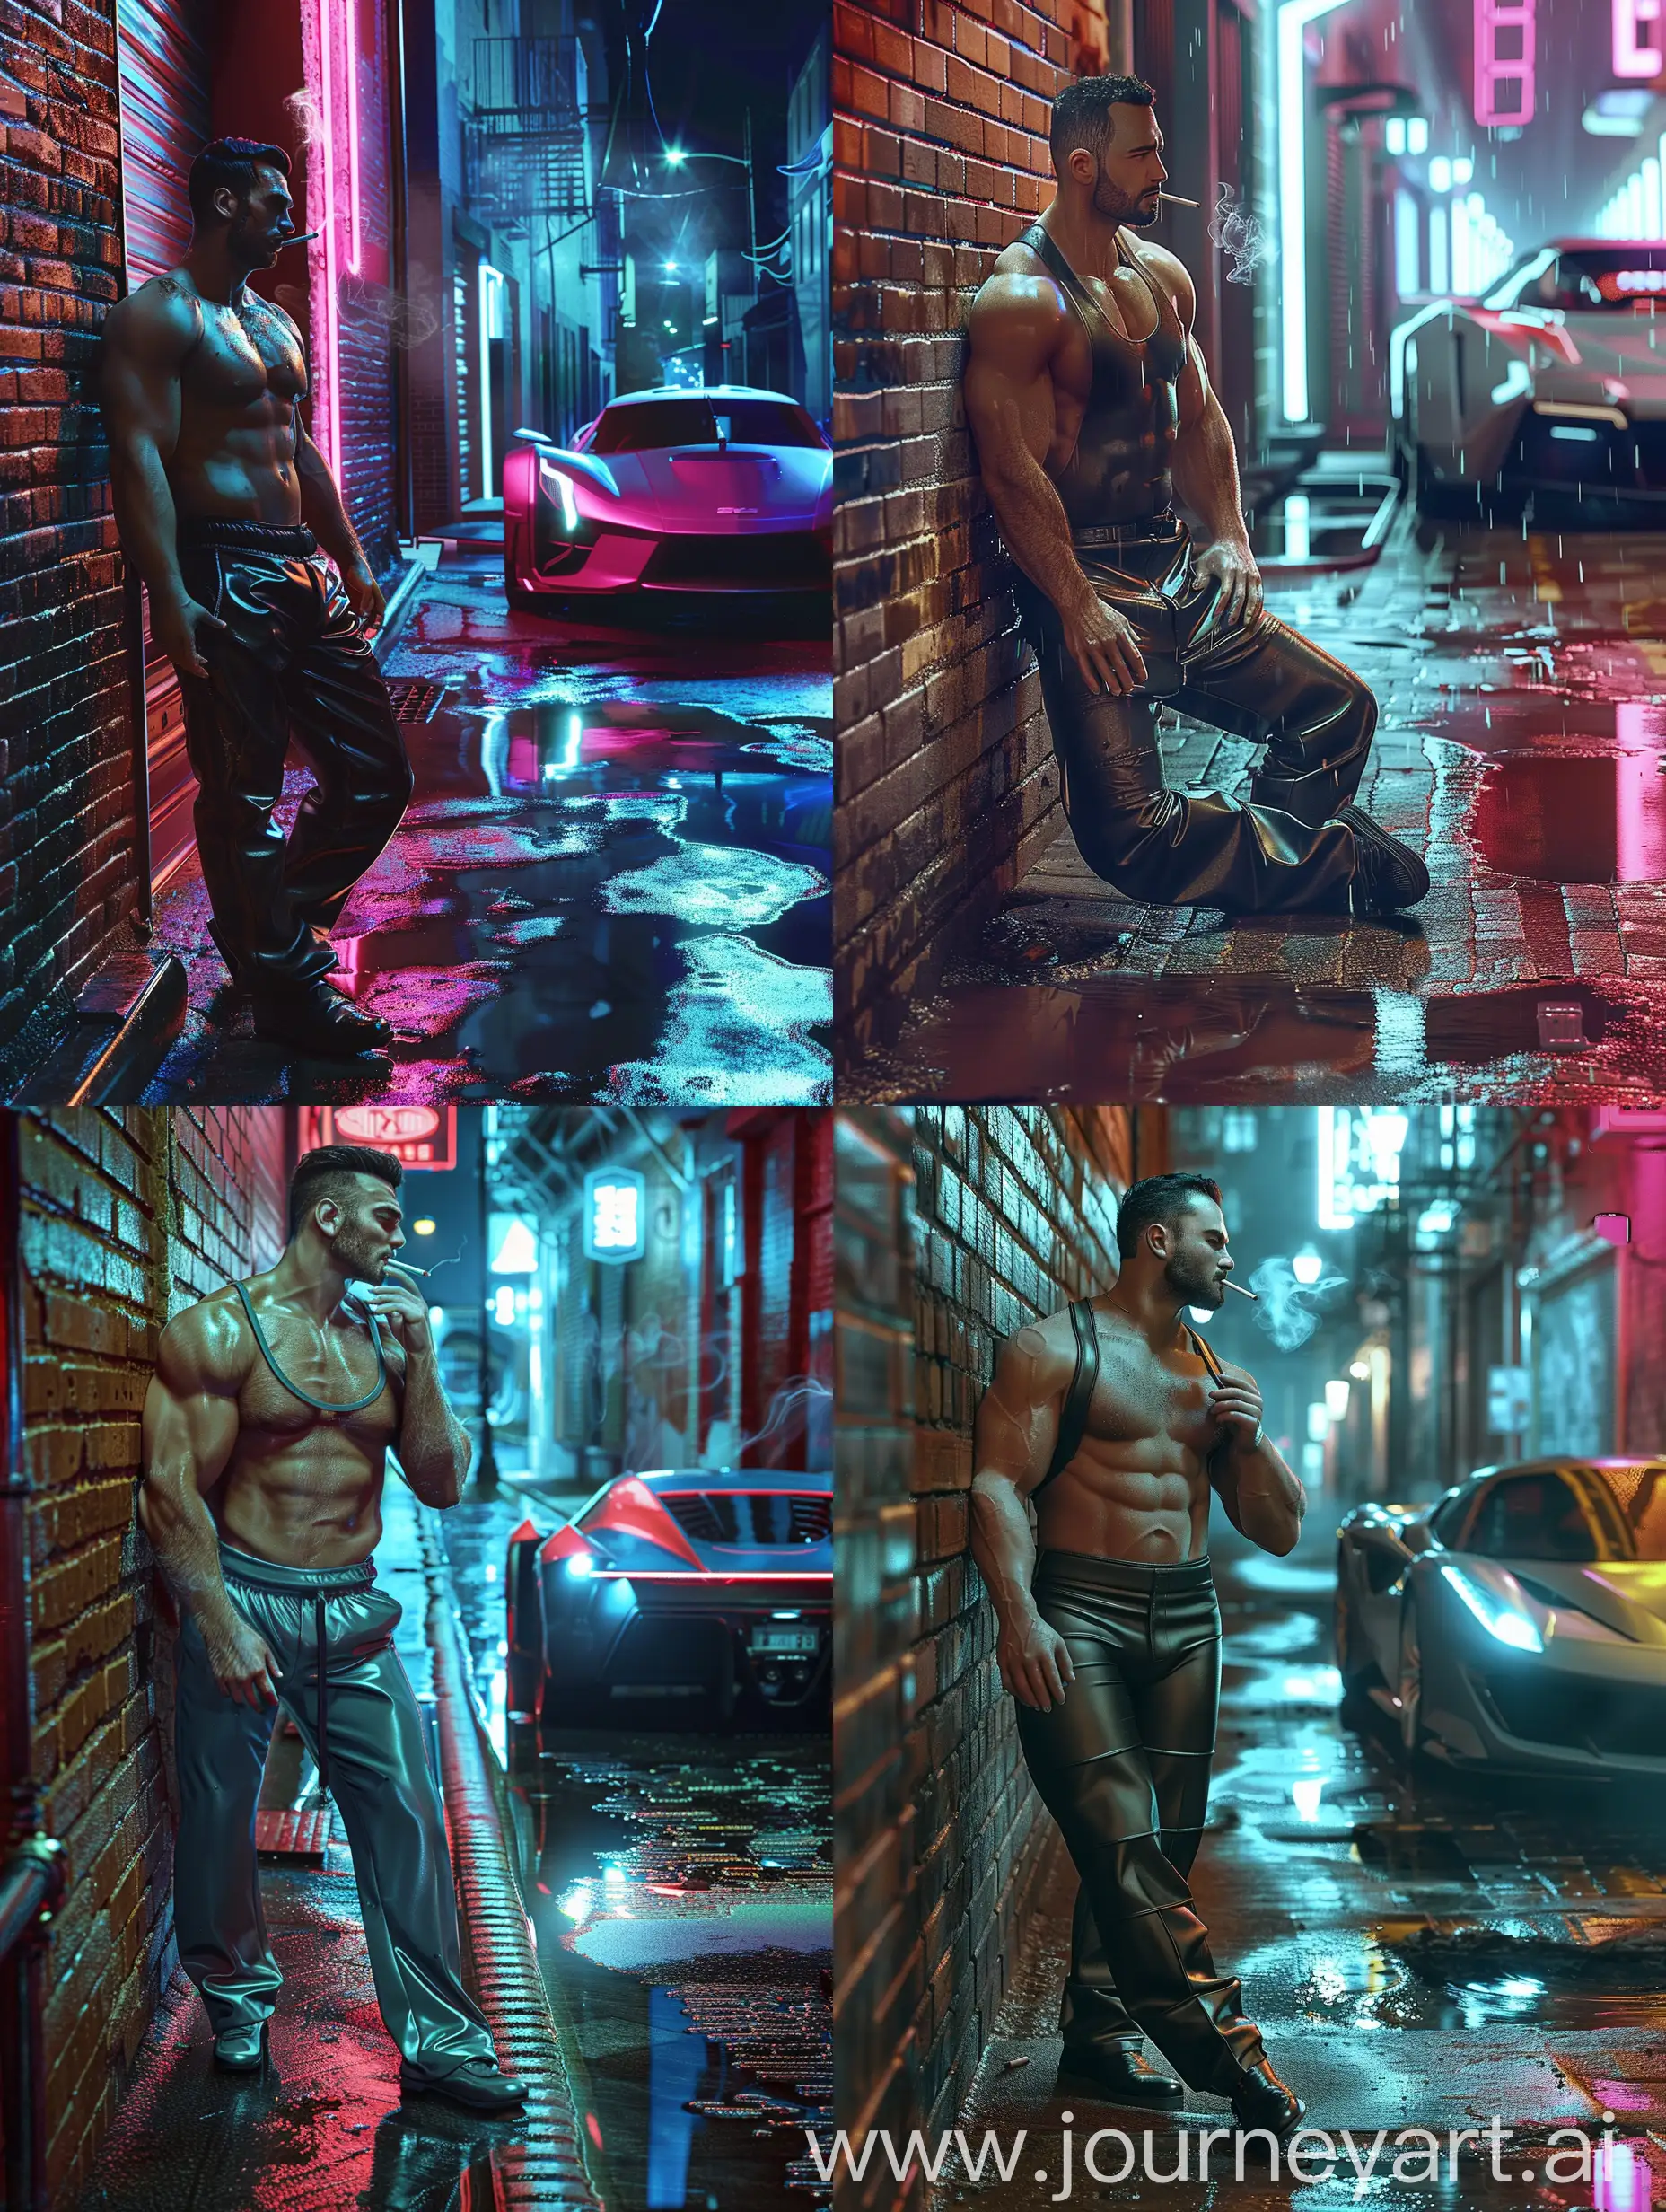 Muscular-Man-Smoking-Cigarette-in-Neonwave-City-Alley